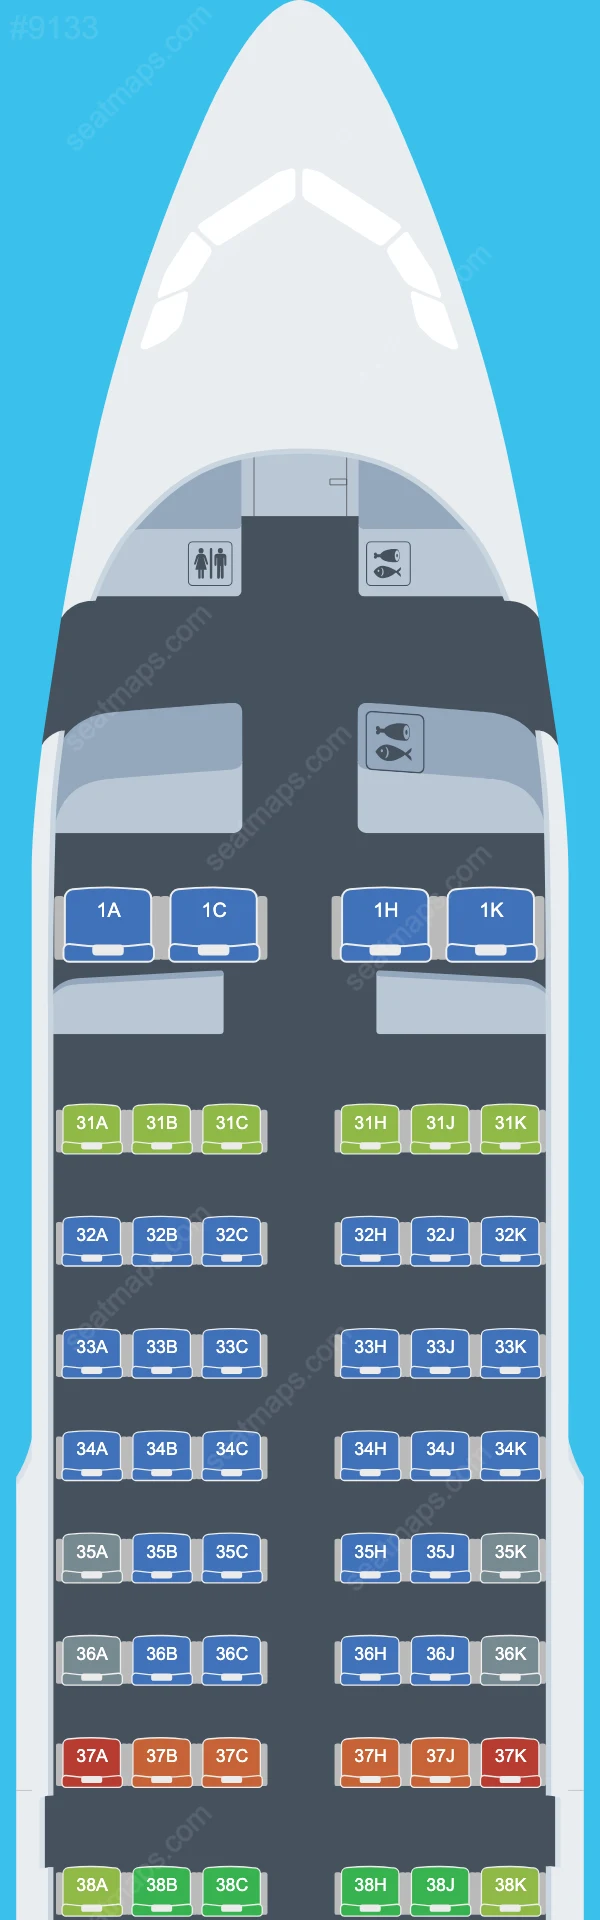 China Southern Airbus A319-100 V.2 seatmap mobile preview